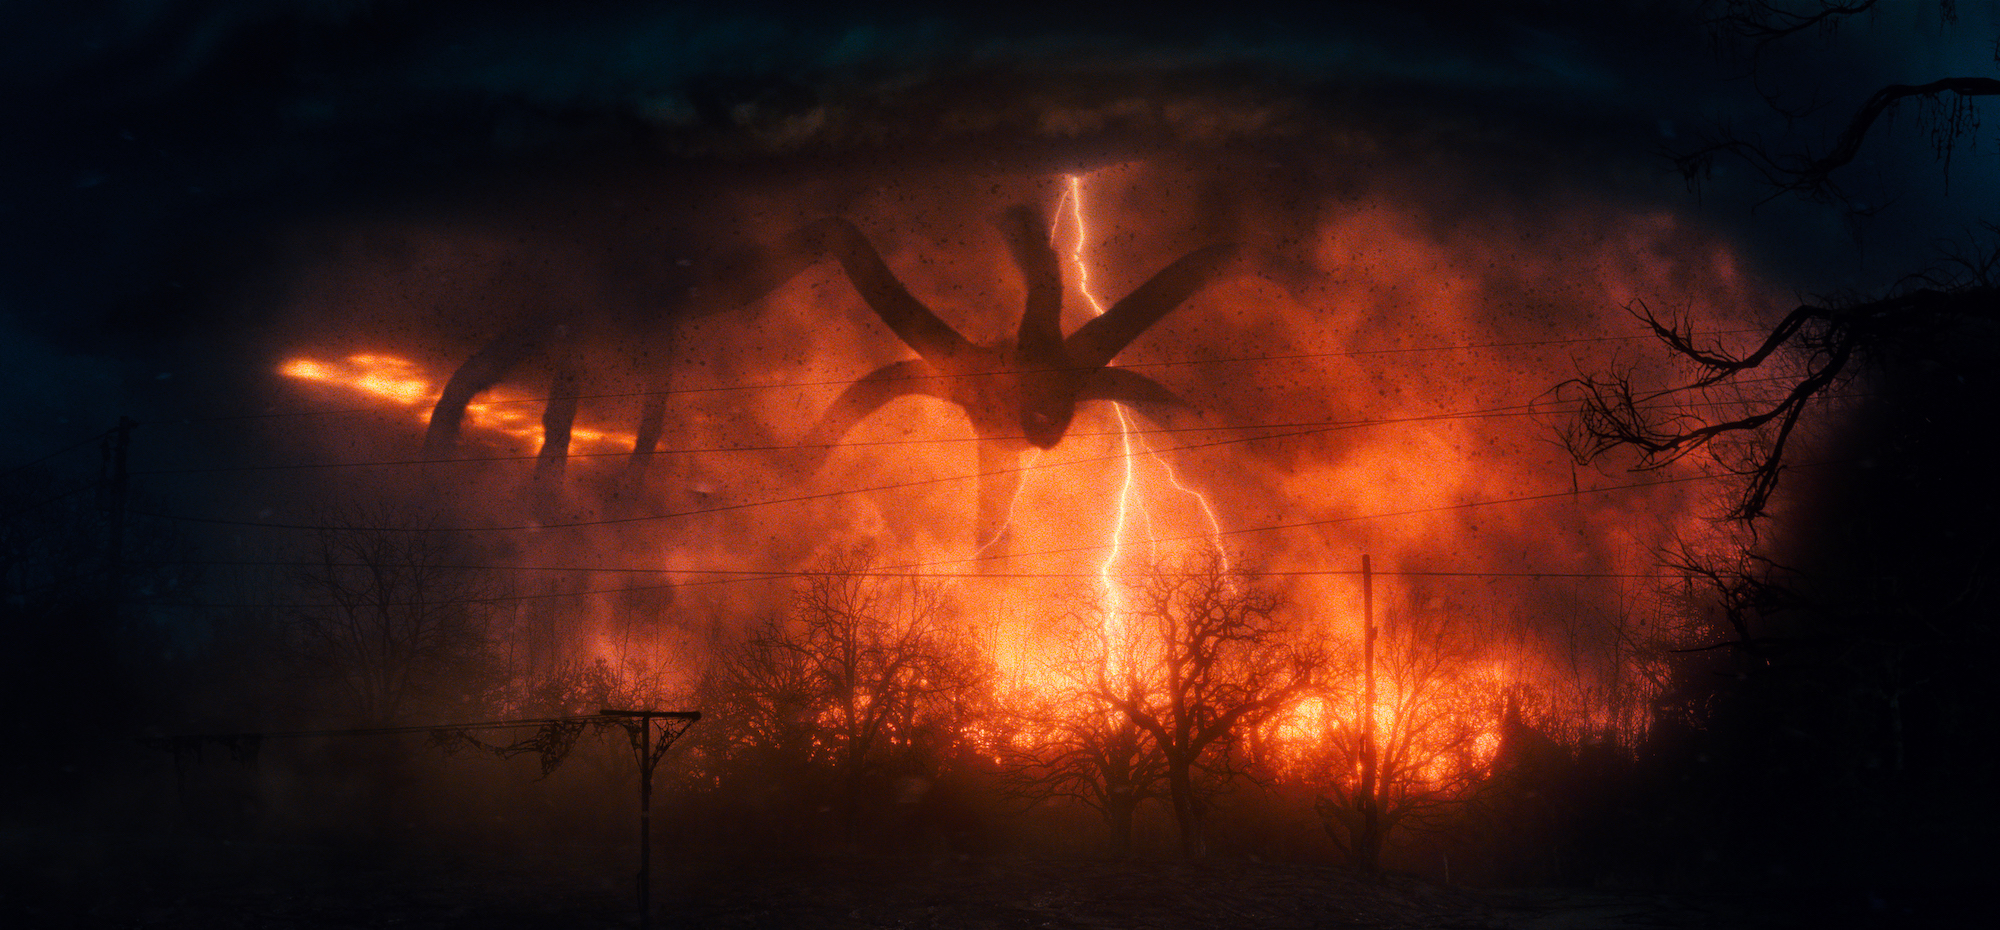 'Stranger Things' Season 4 villain the Mind Flayer is only mentioned in passing. Here, the Mind Flayer's silhouette is seen in front of a red stormy sky.